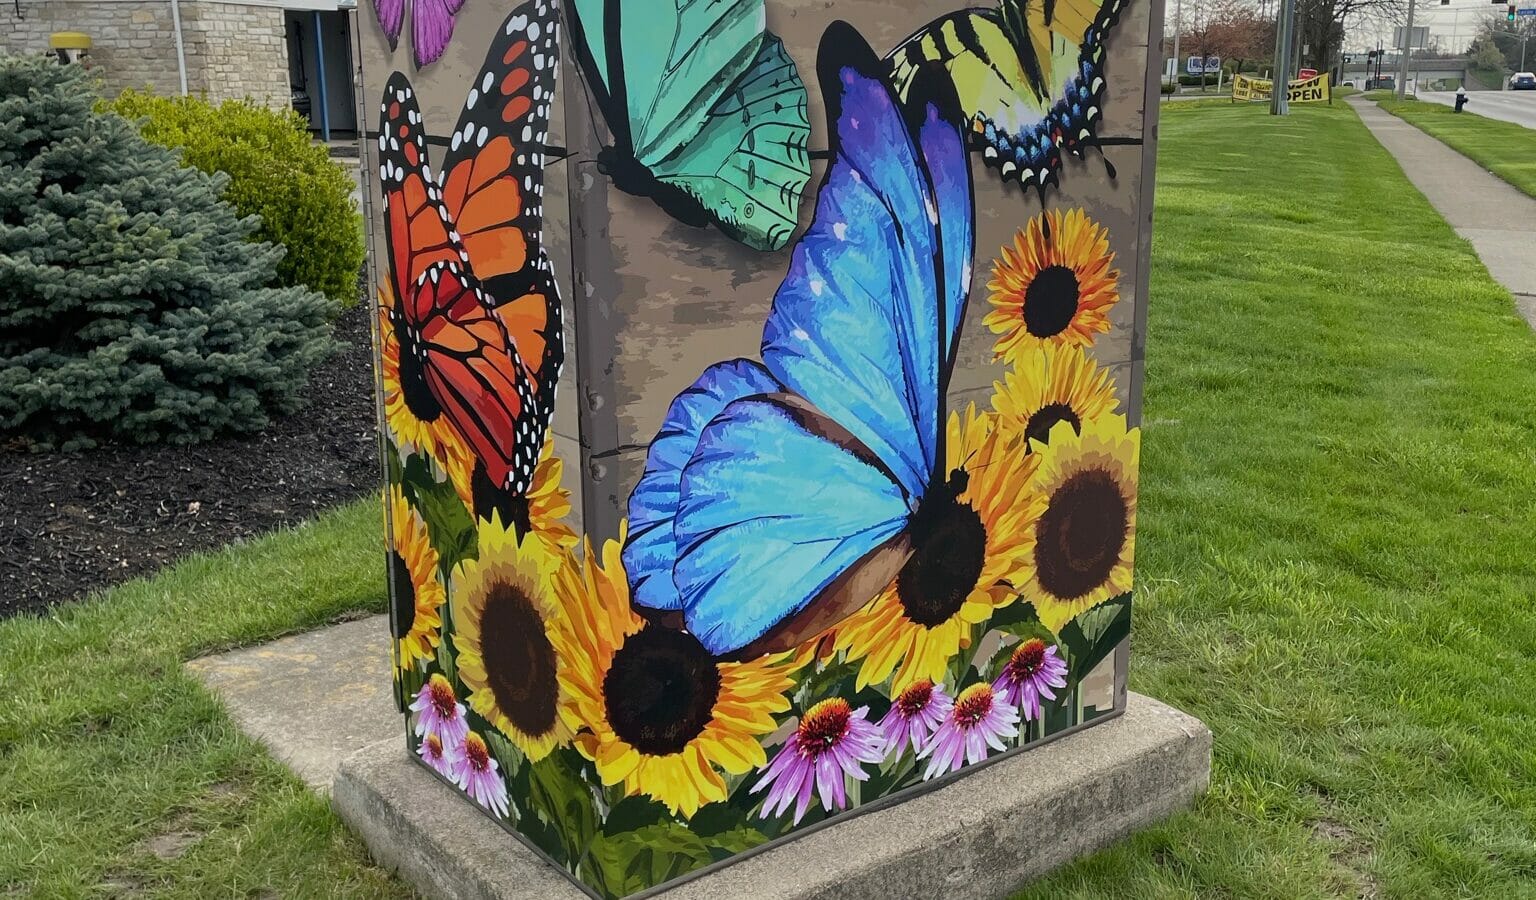 Utility box painted with sunflowers